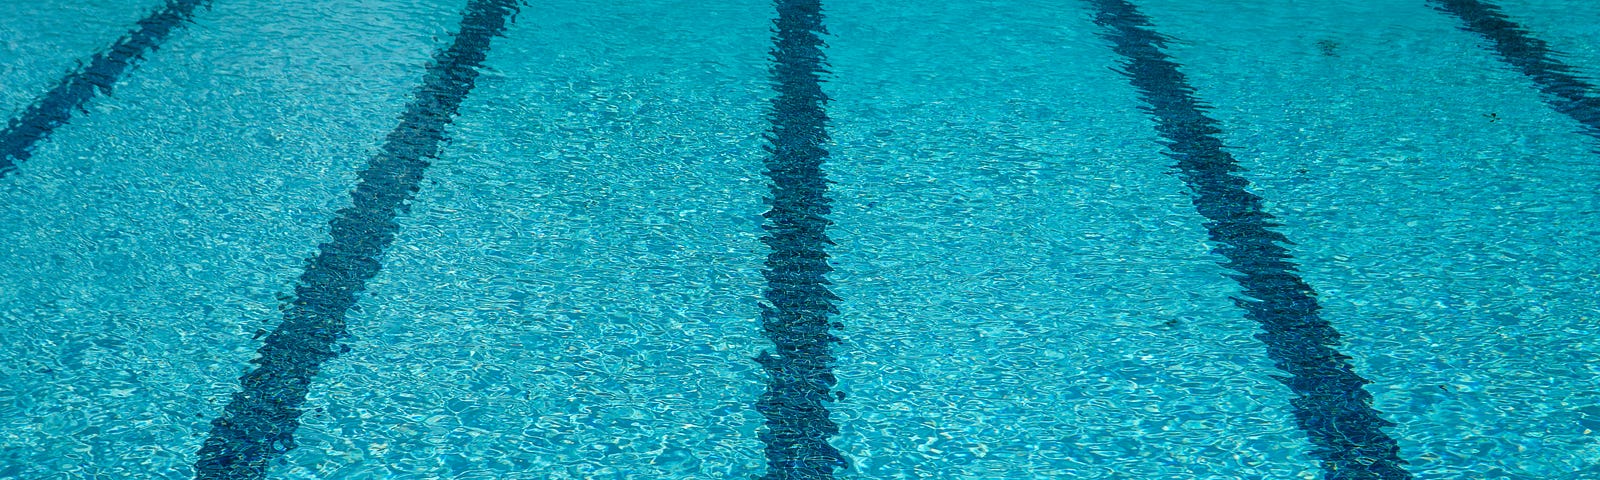 dark blue guidelines for lanes in a turquoise blue swimming pool.